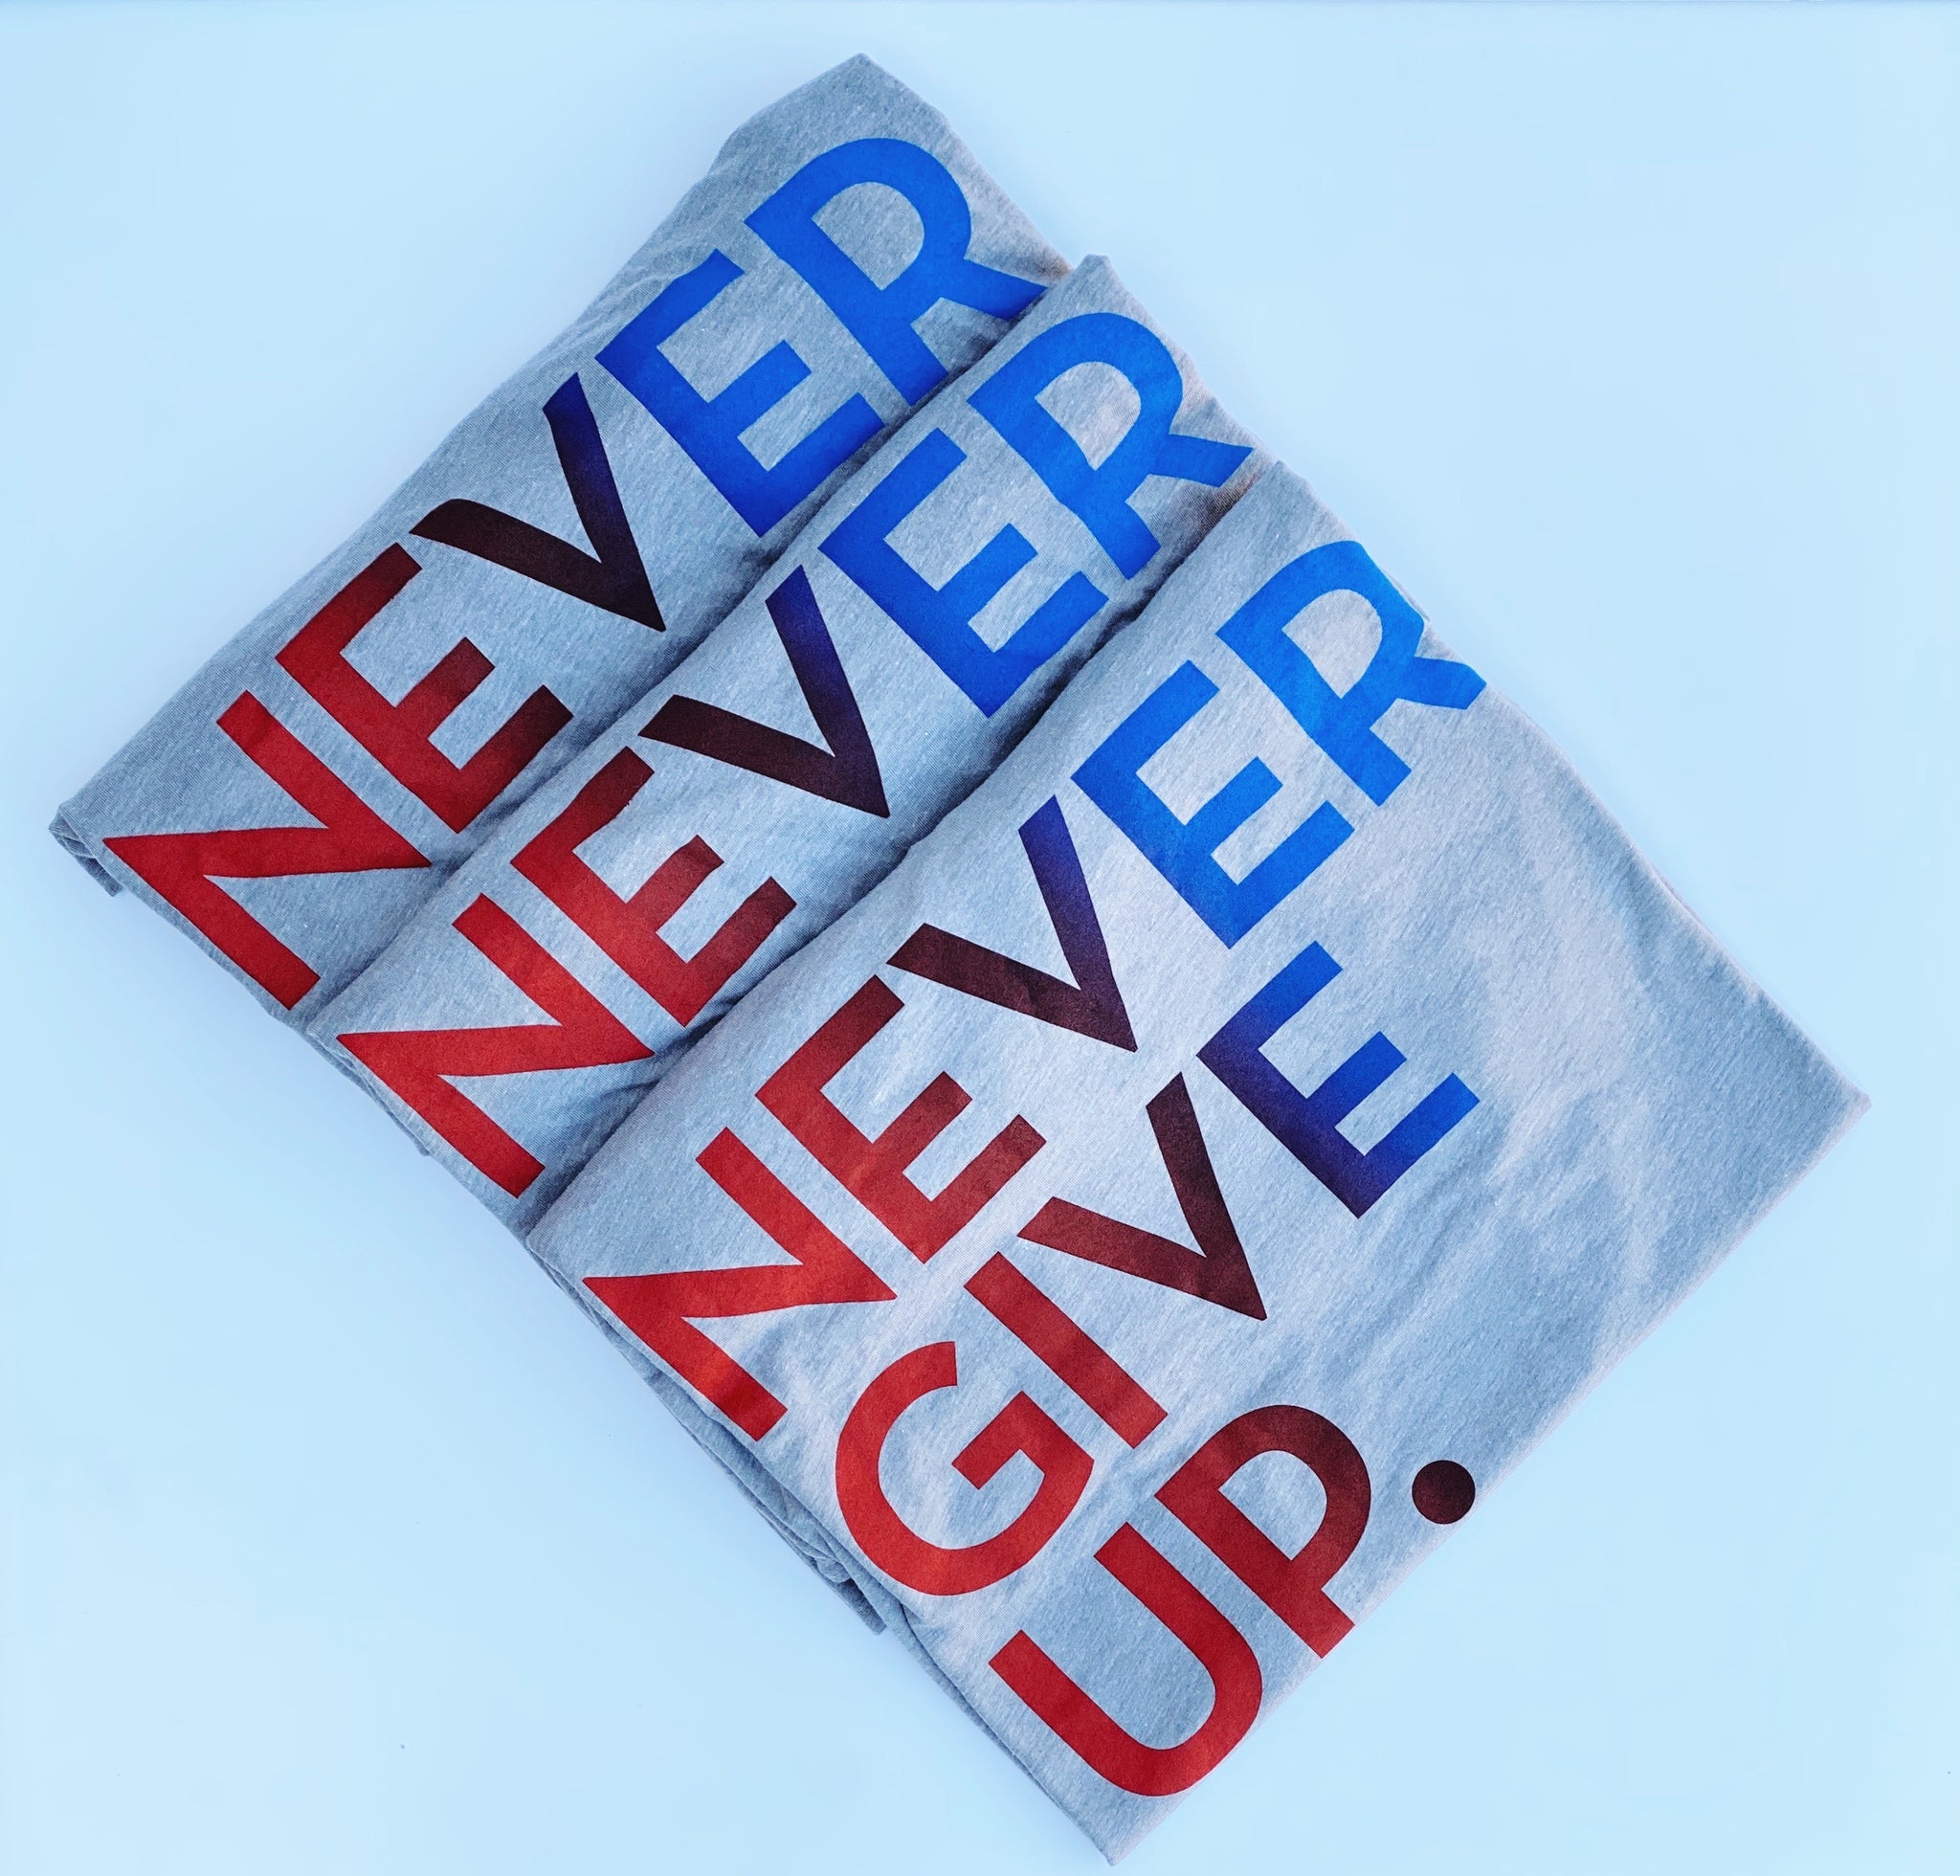 KIDS OMBRE NEVER GIVE UP. TEE